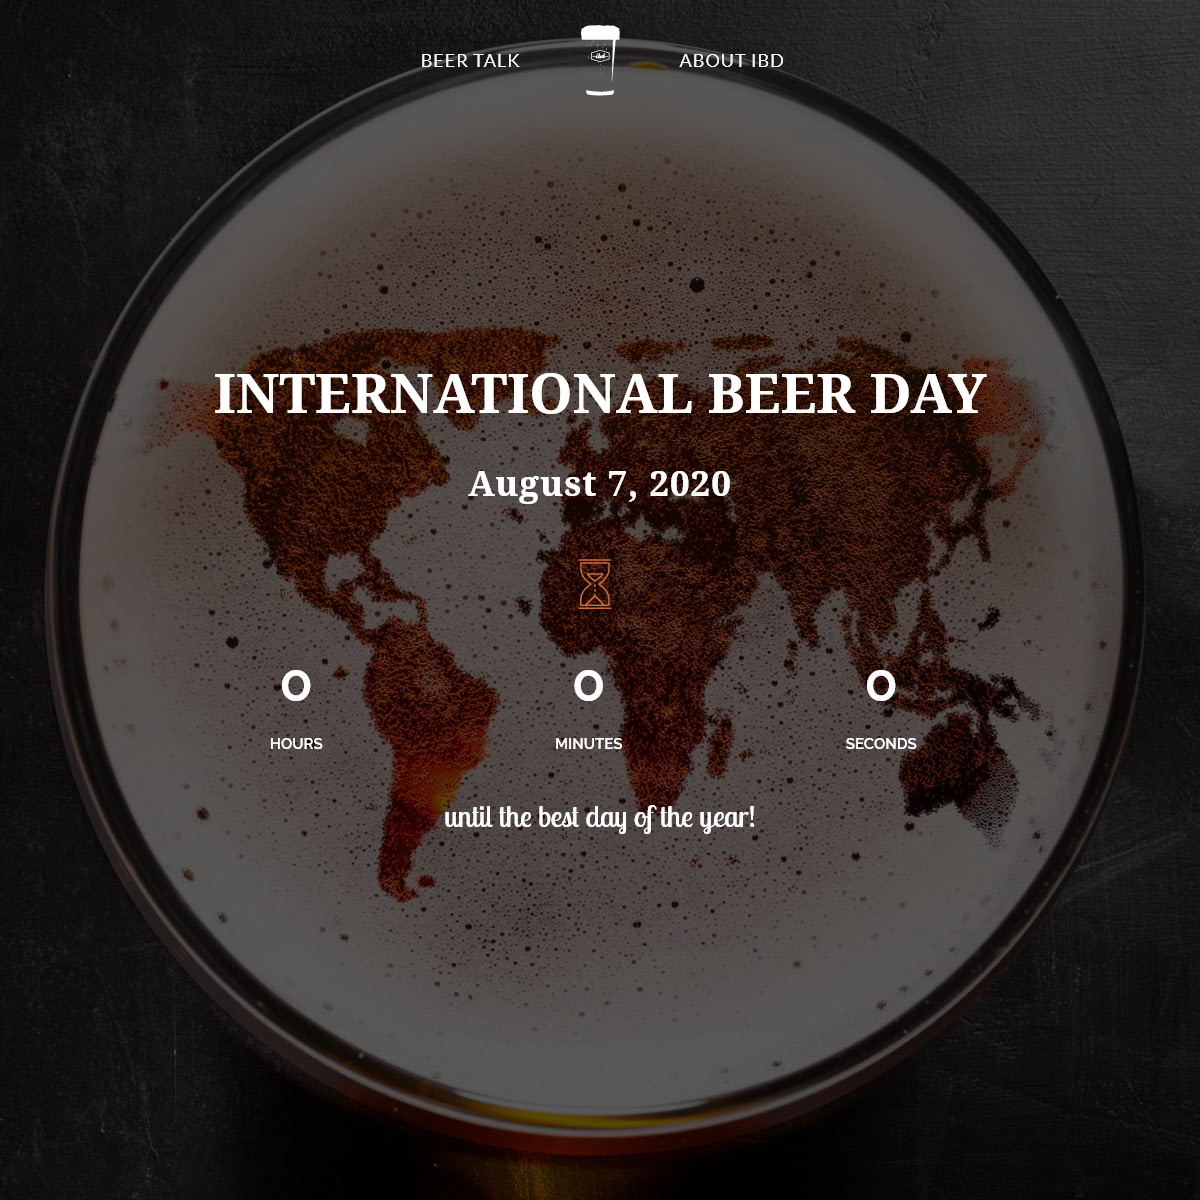 A complete backup of internationalbeerday.com